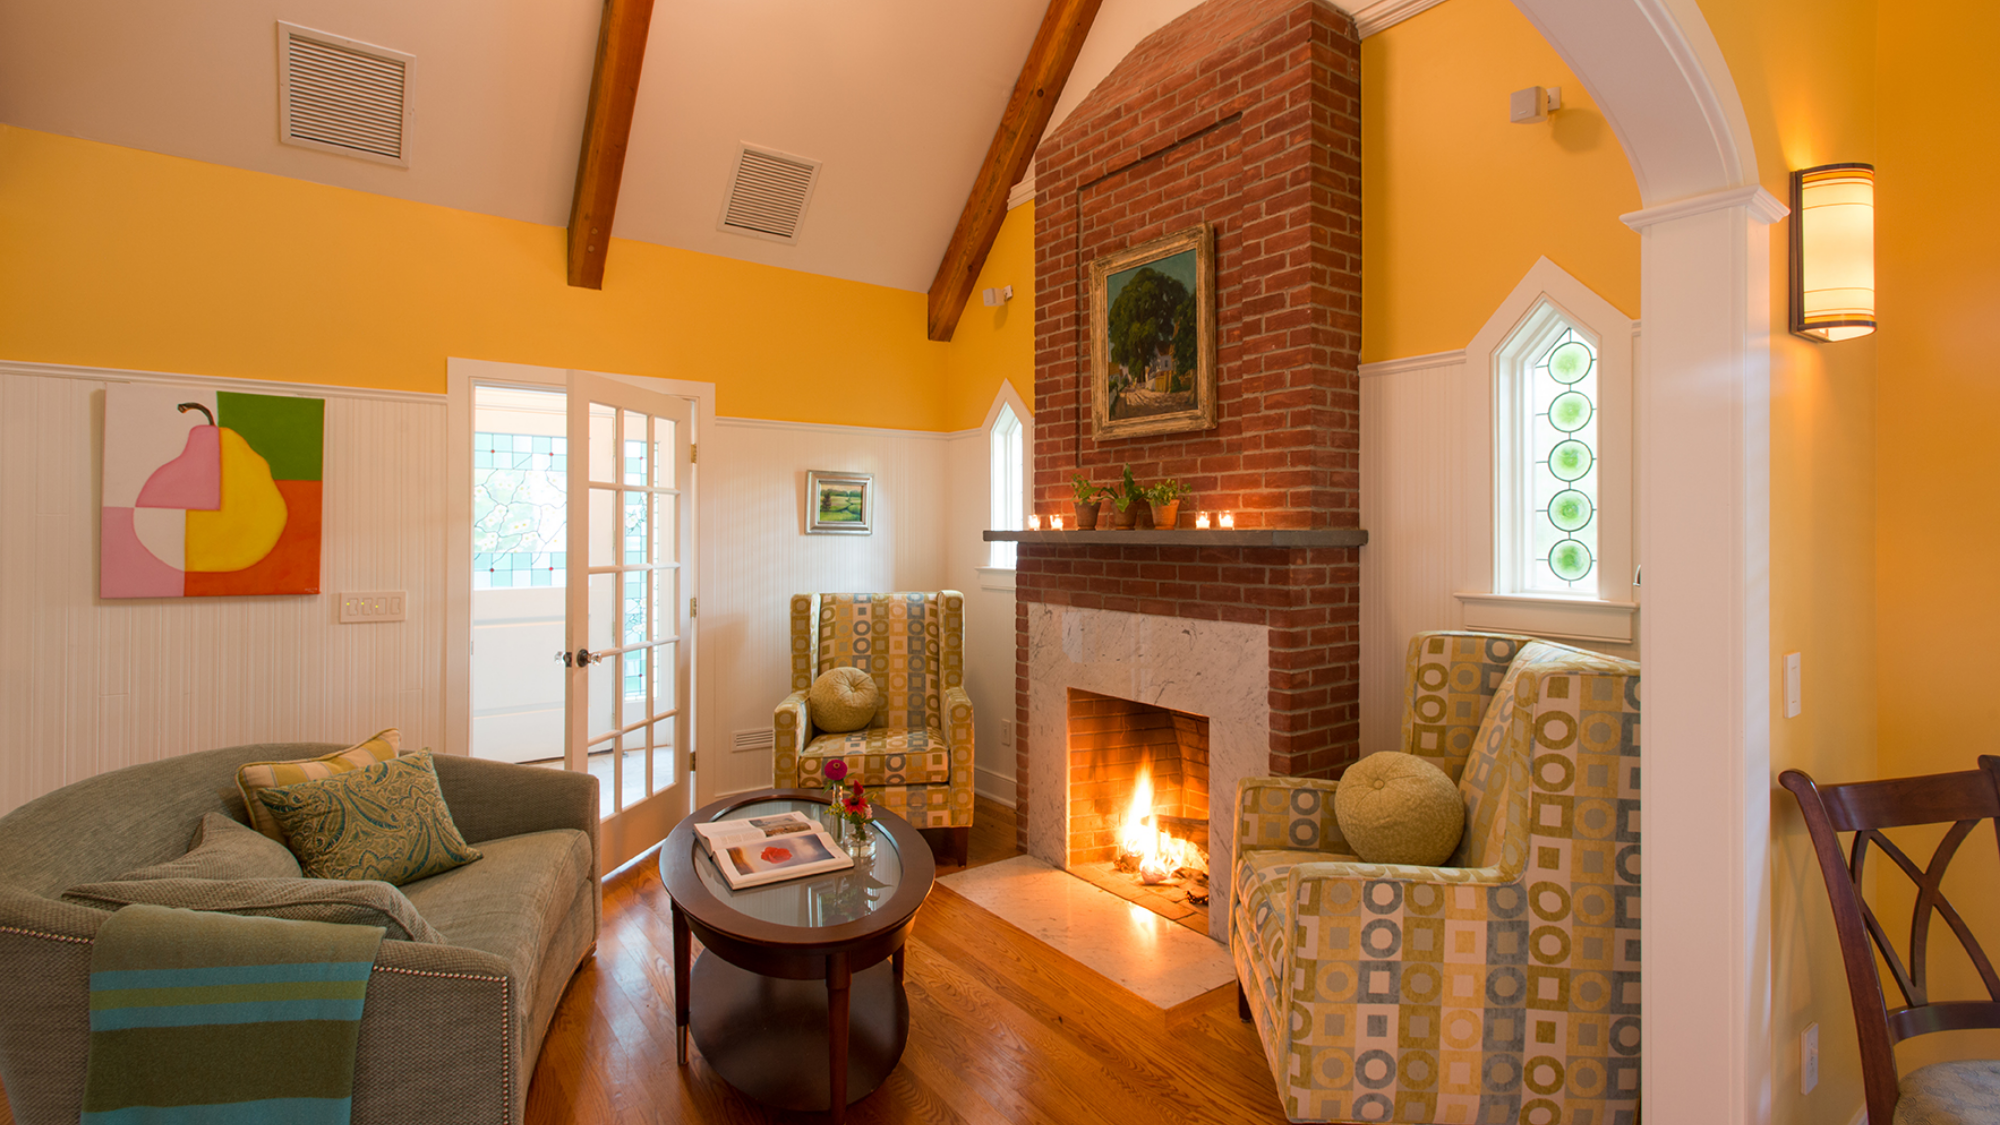 Cozy living room with a fireplace and bright yellow walls at Winvian Farm.